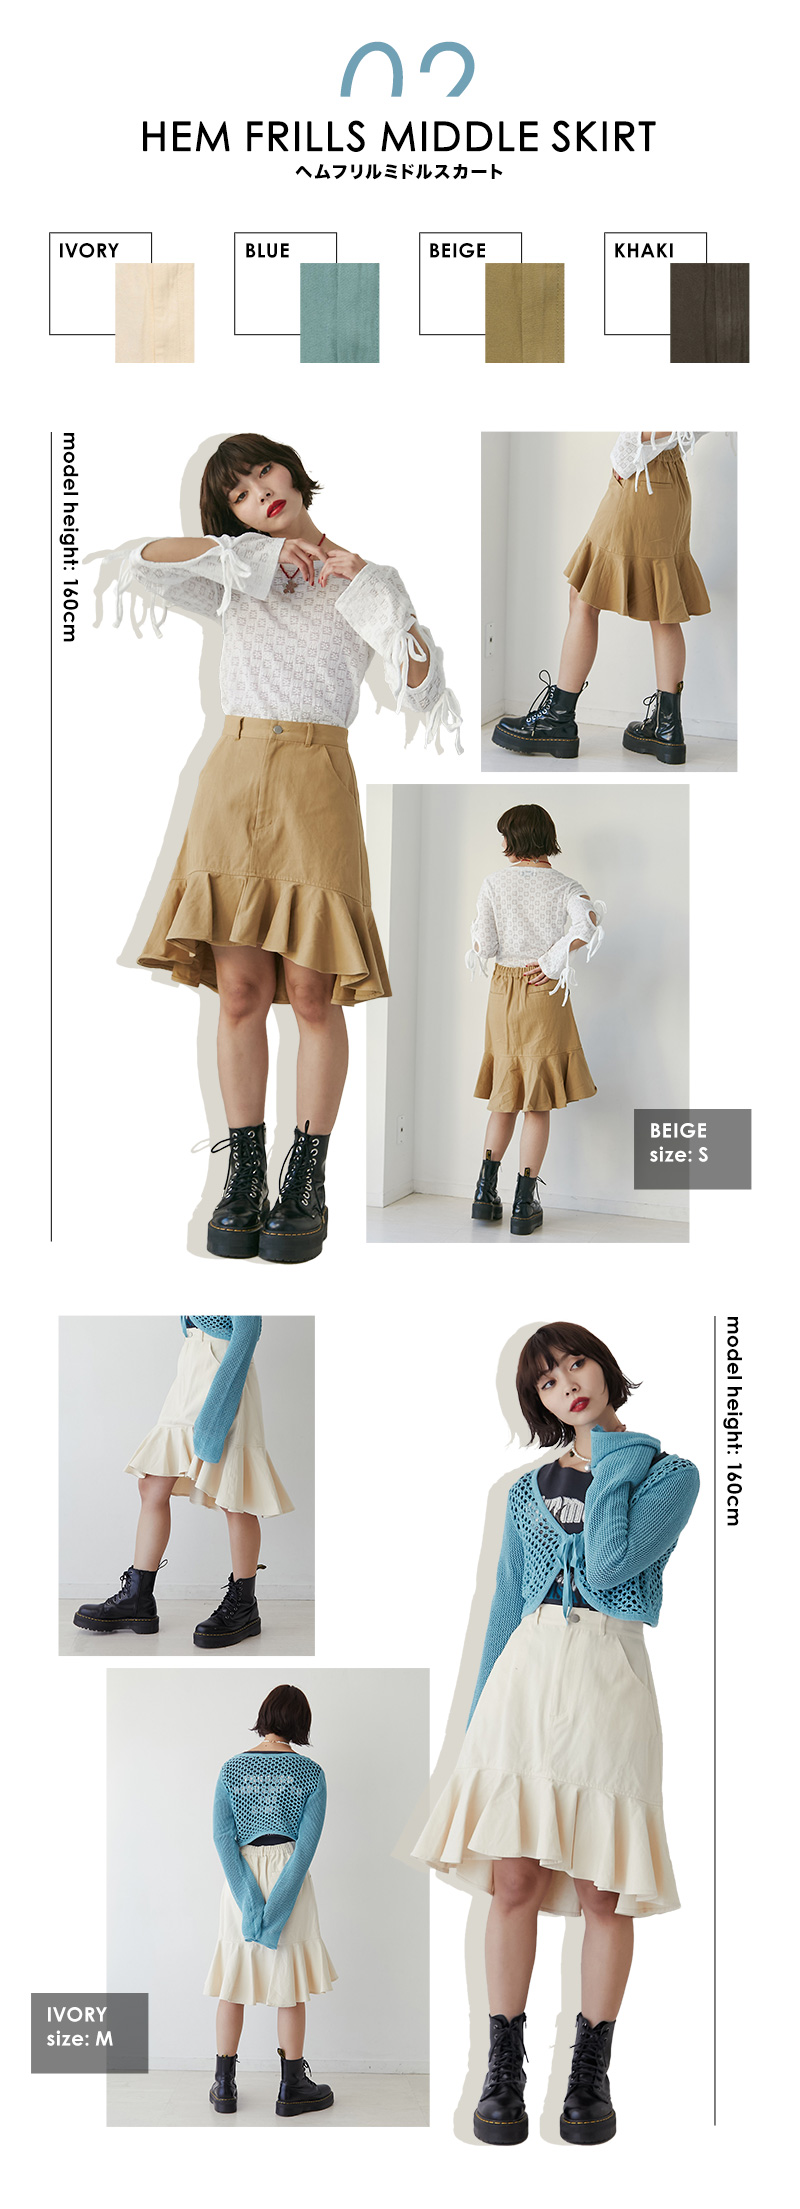 NEW TREND! MIDDLE SKIRT